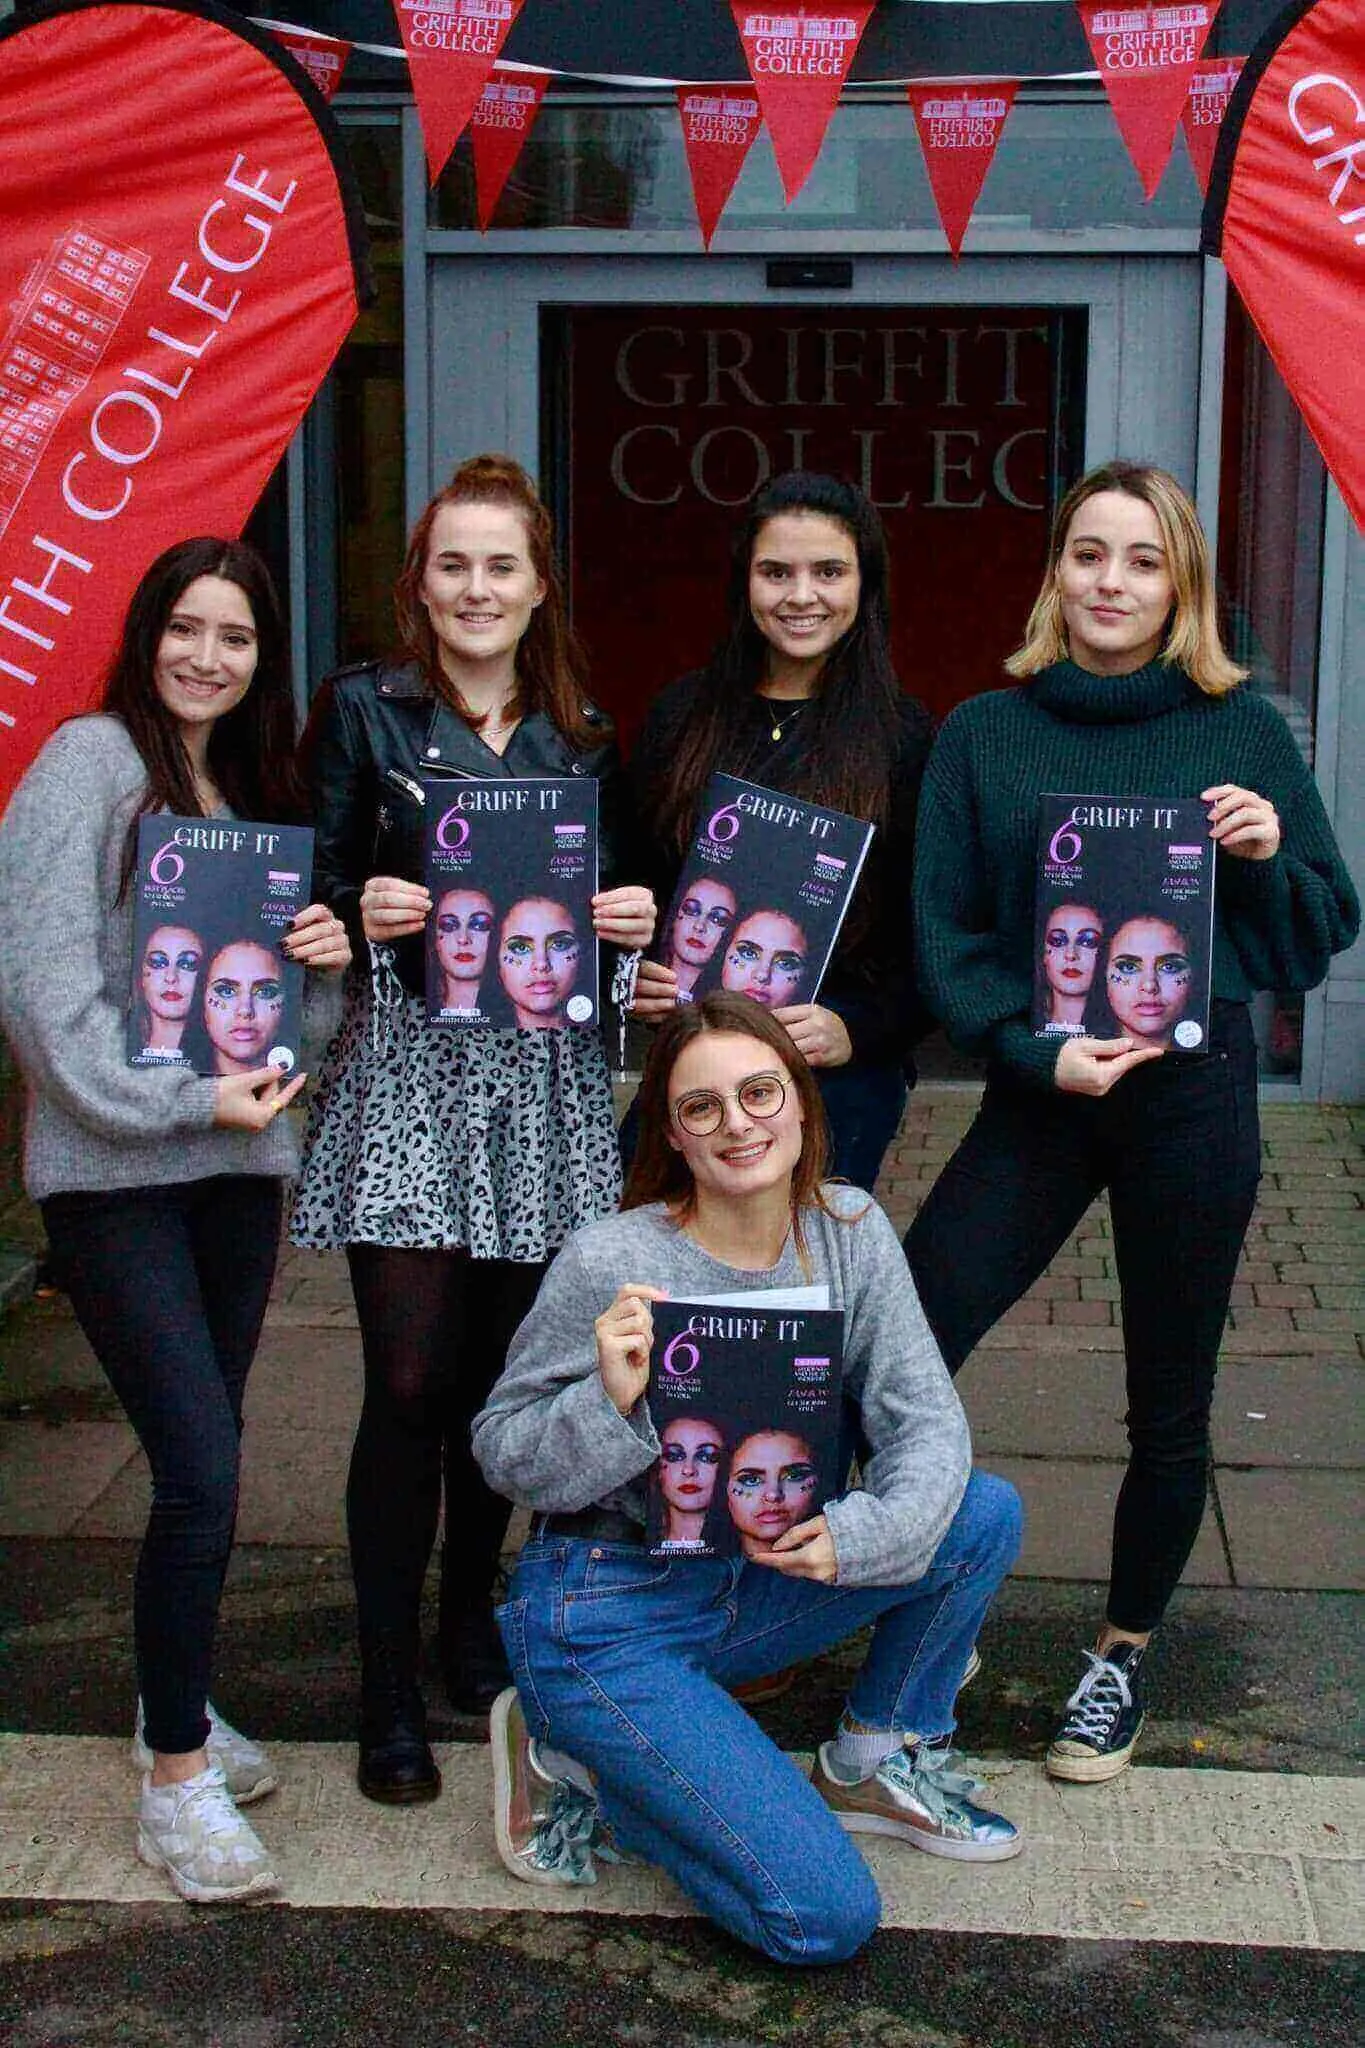 Griffith College Cork Campus Launches Issue 1 of 'Griff-it' Magazine